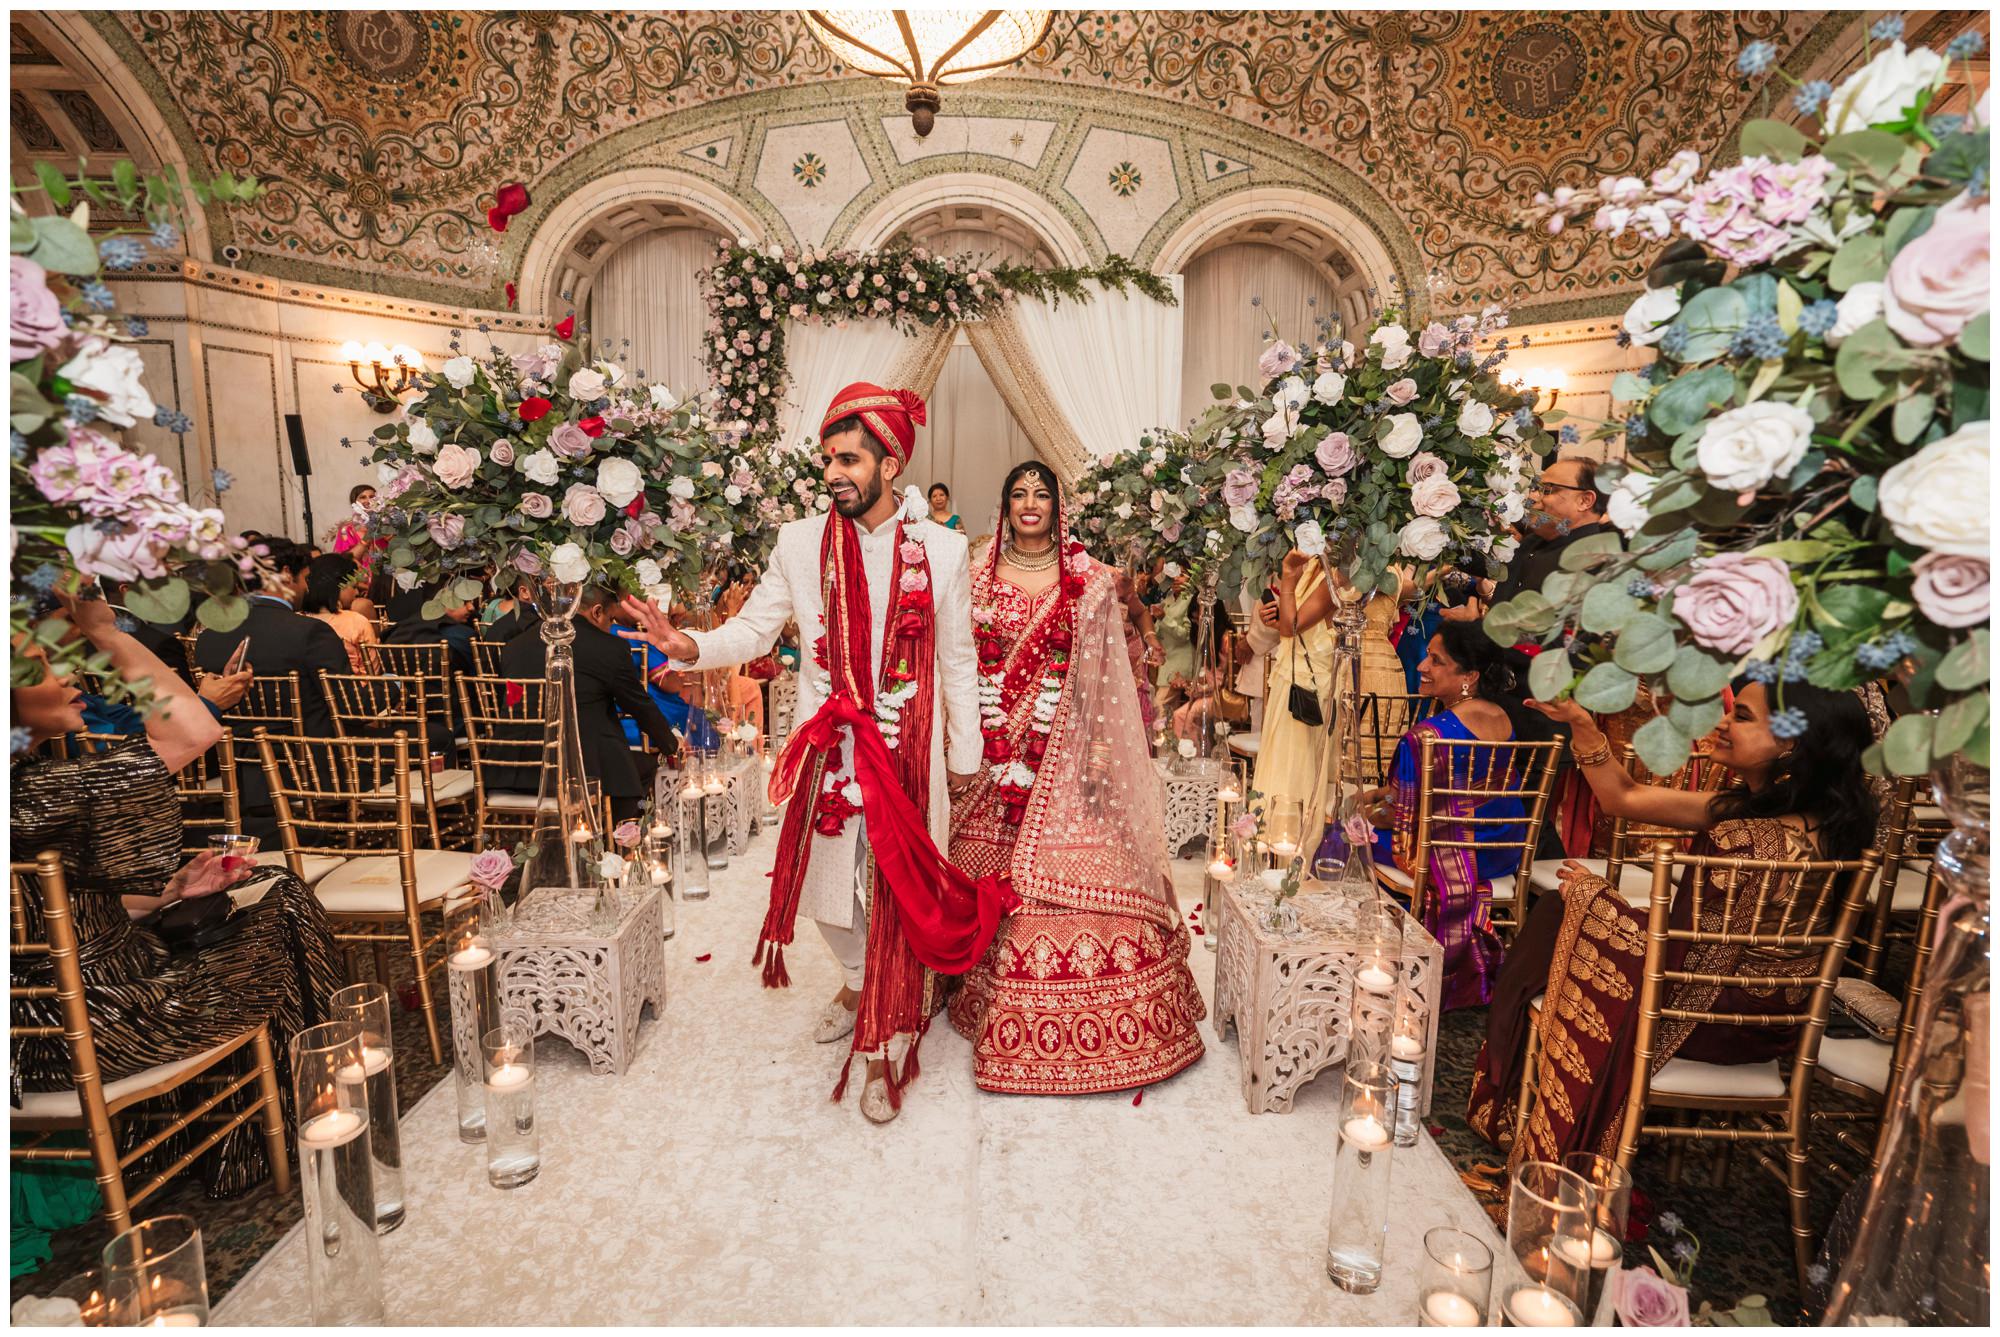 Indian wedding traditions